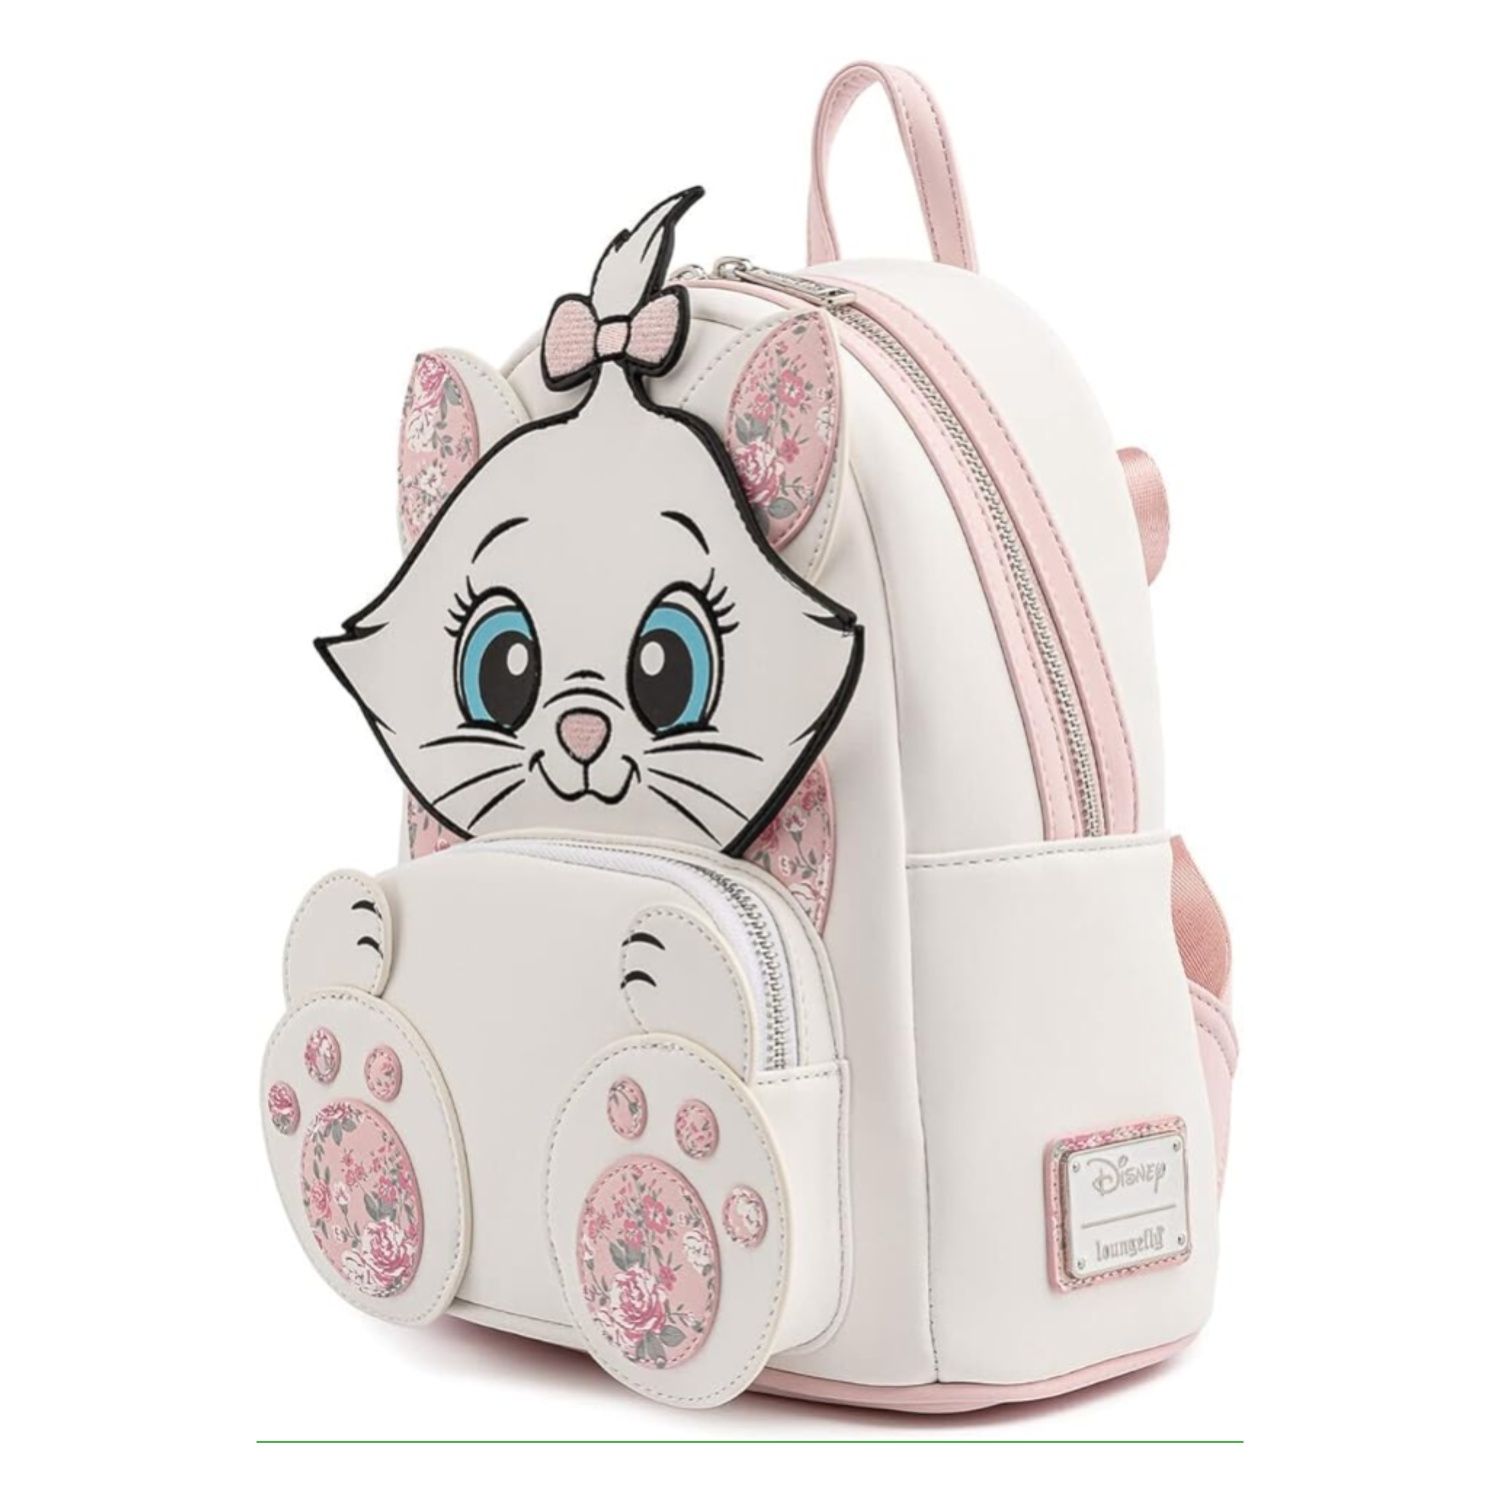 This white and pink bag is made to look like the kitten Marie